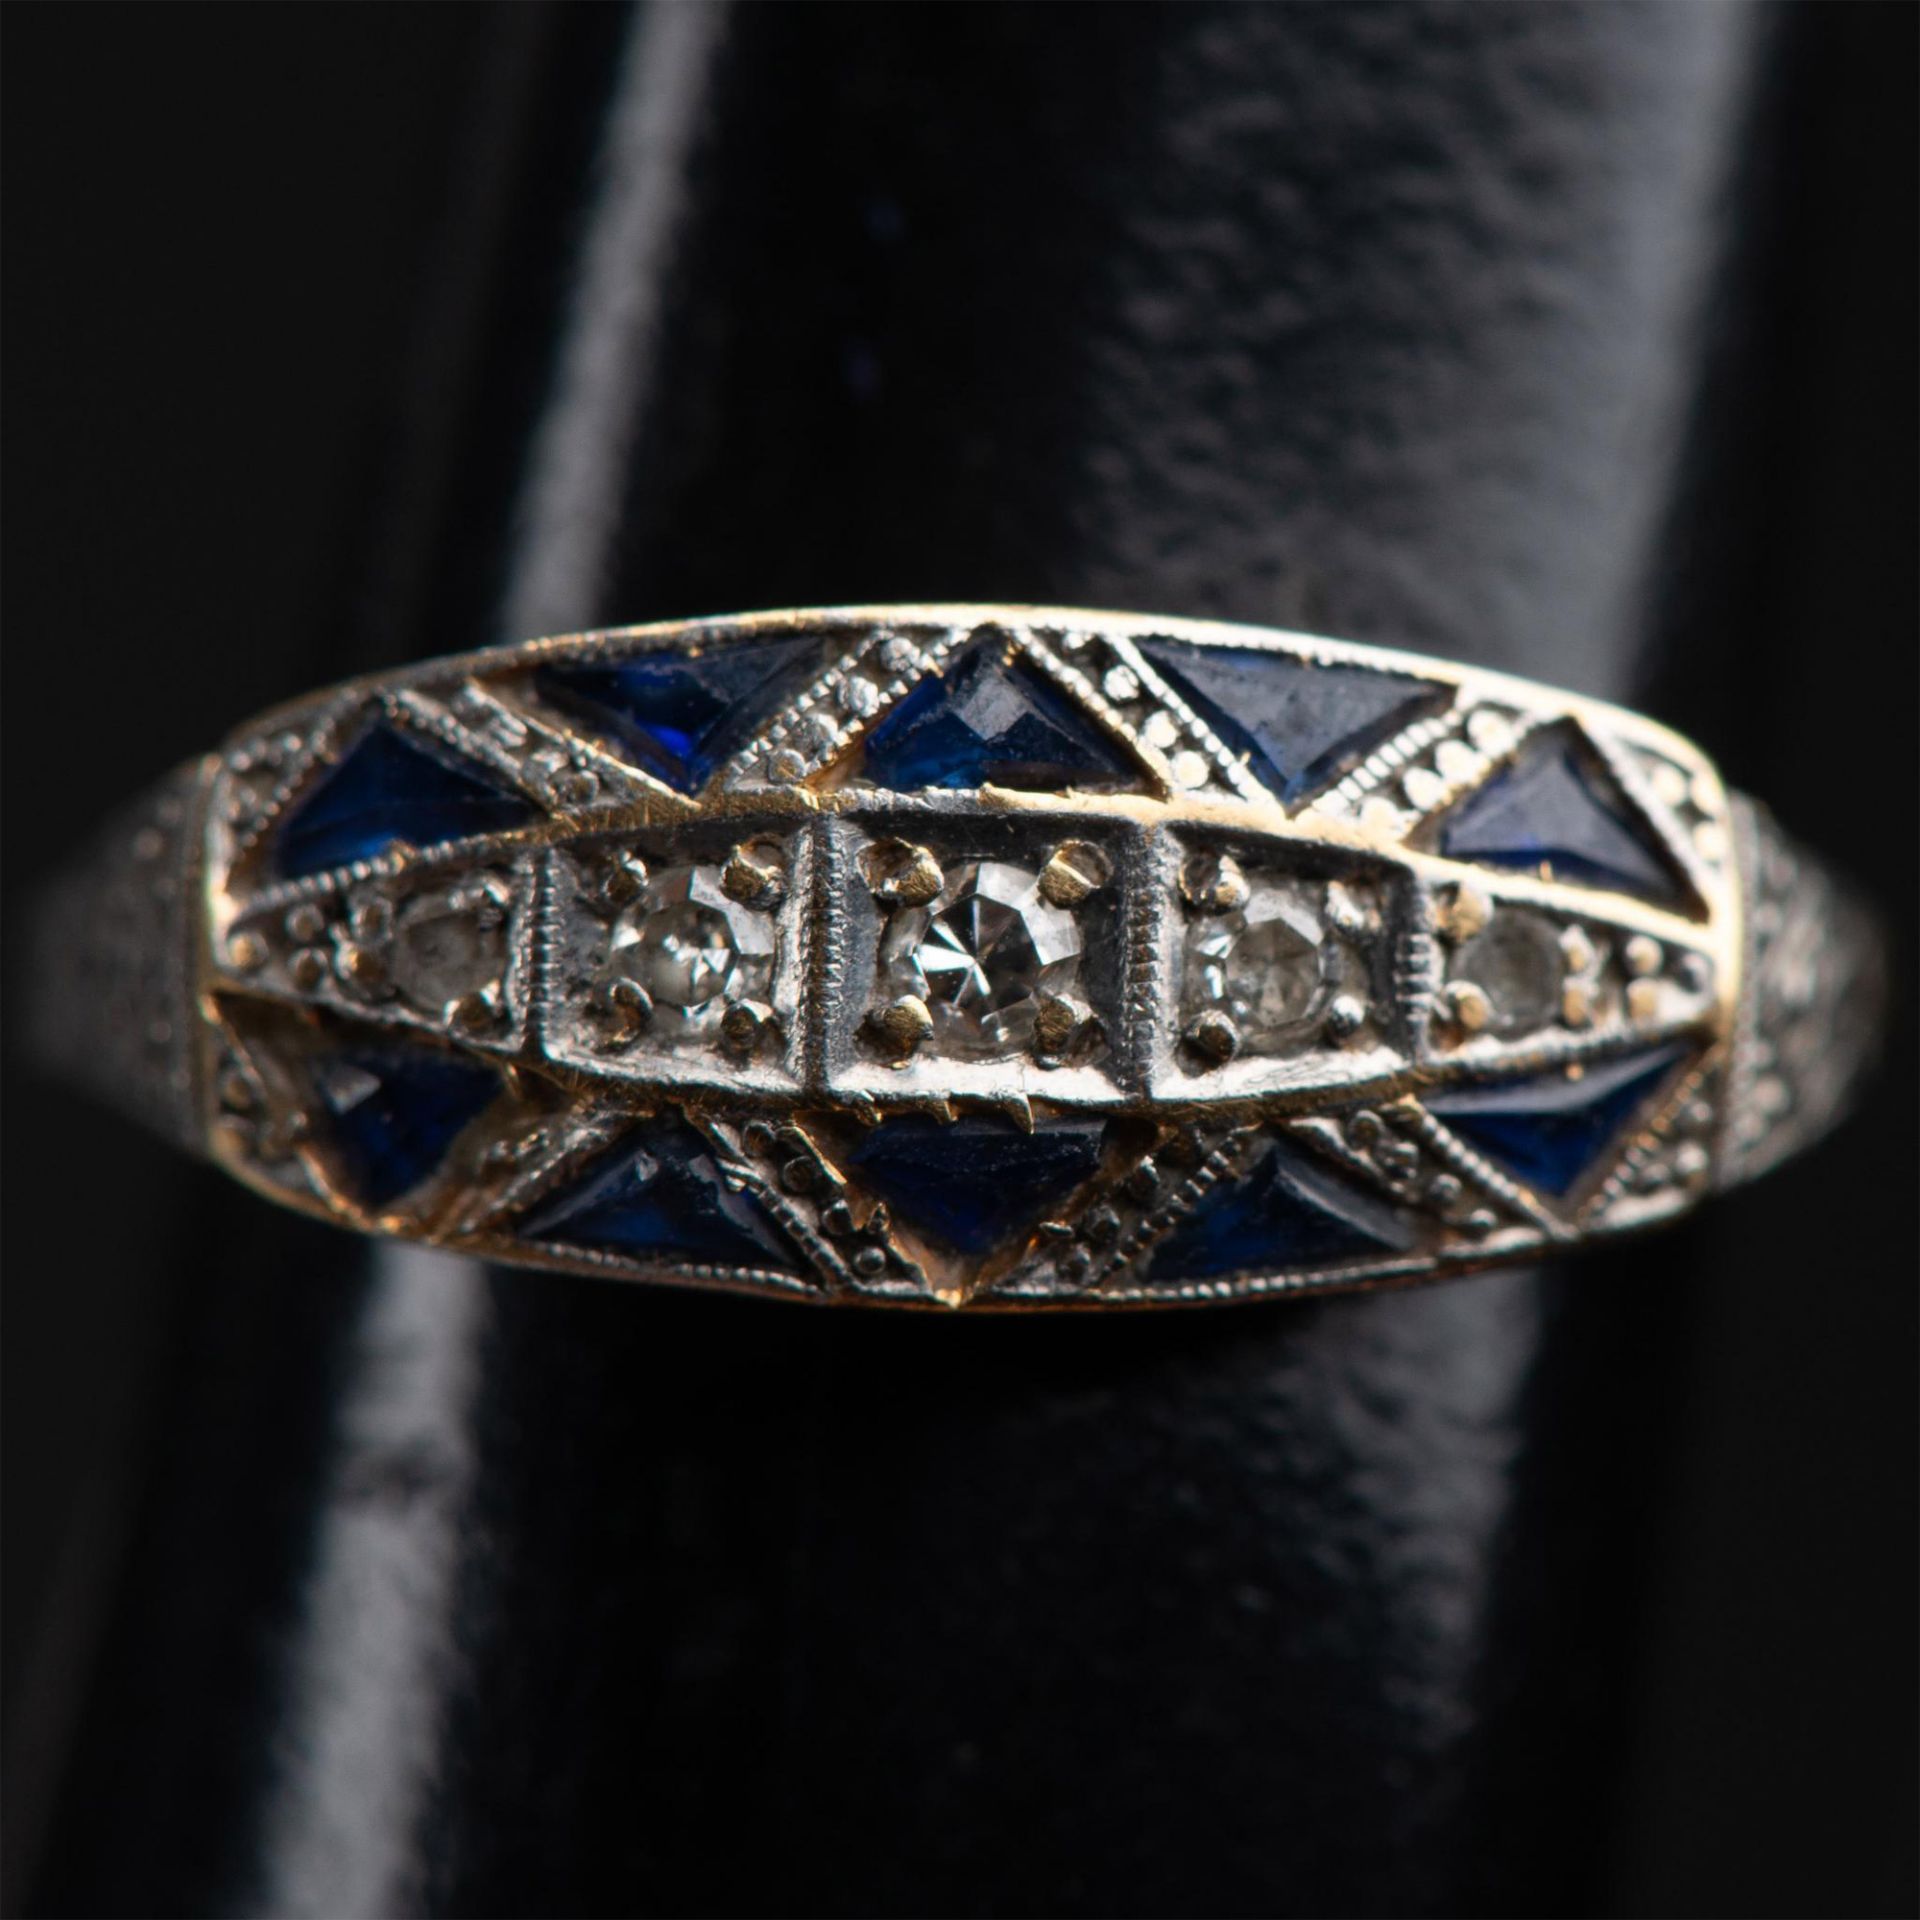 Art Deco Gold, Diamonds and Sapphire Ring - Image 5 of 5